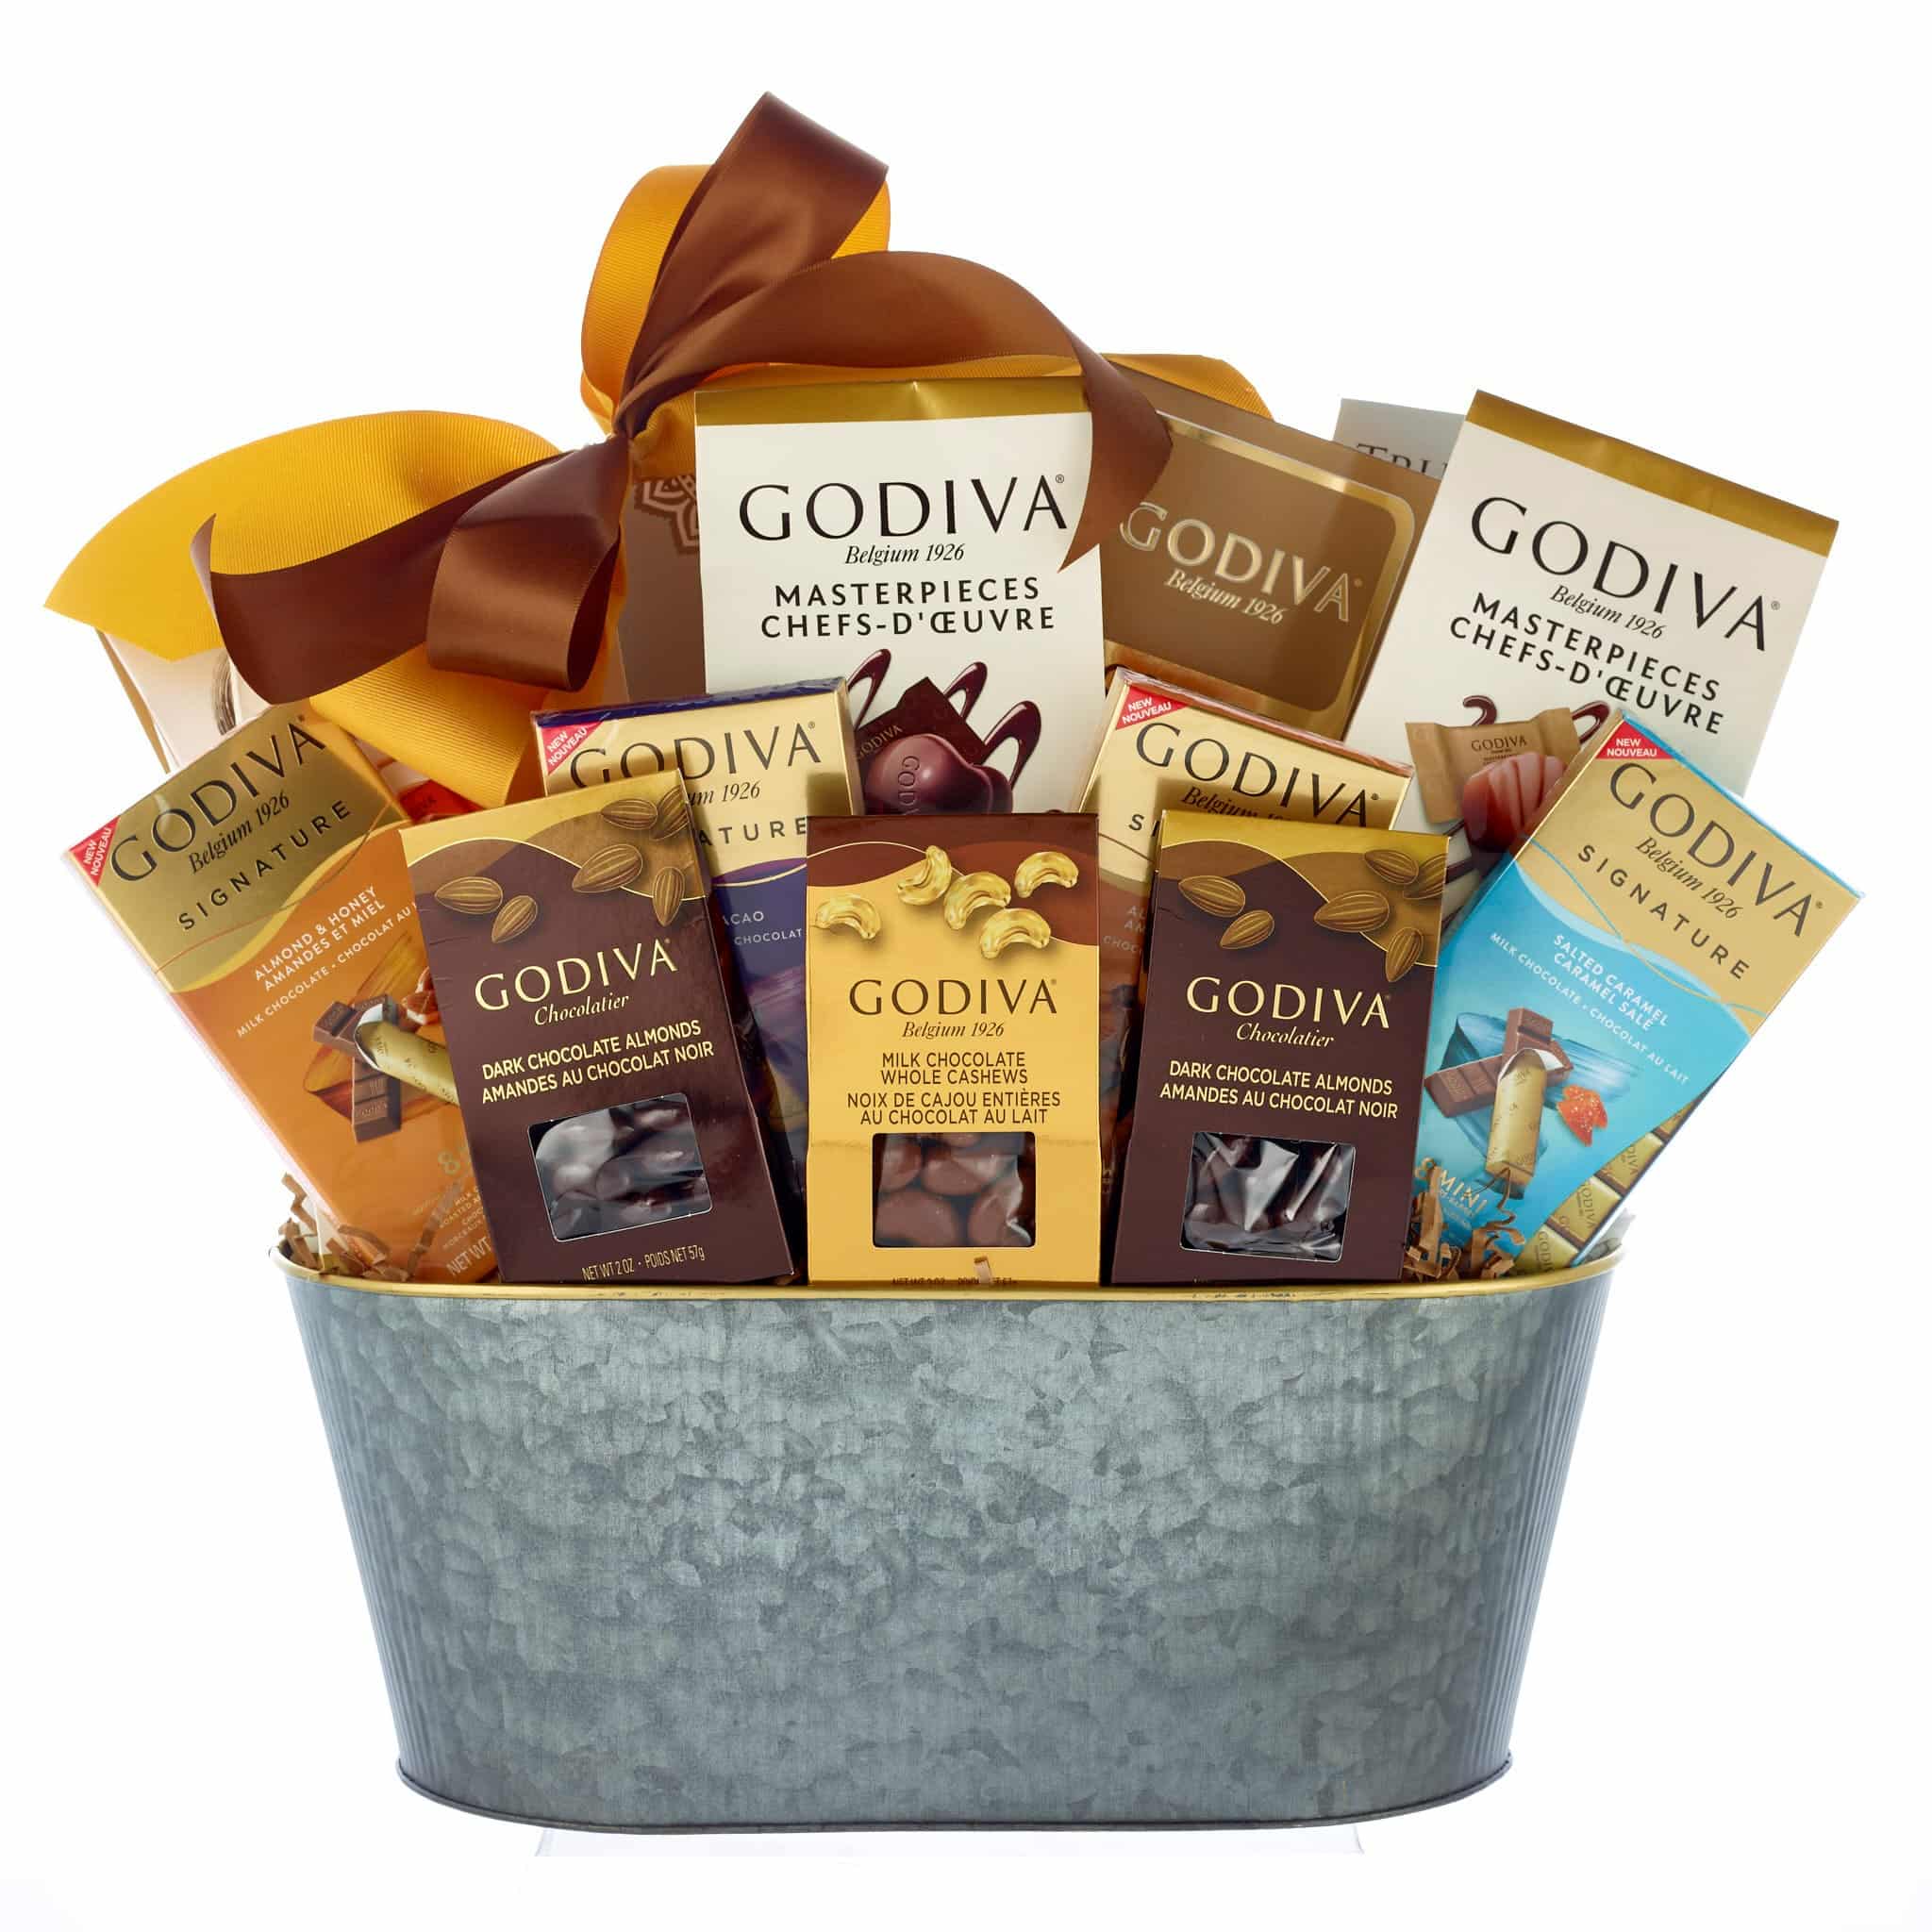 Our Premium Godiva Gift Basket has FREE delivery in Canada